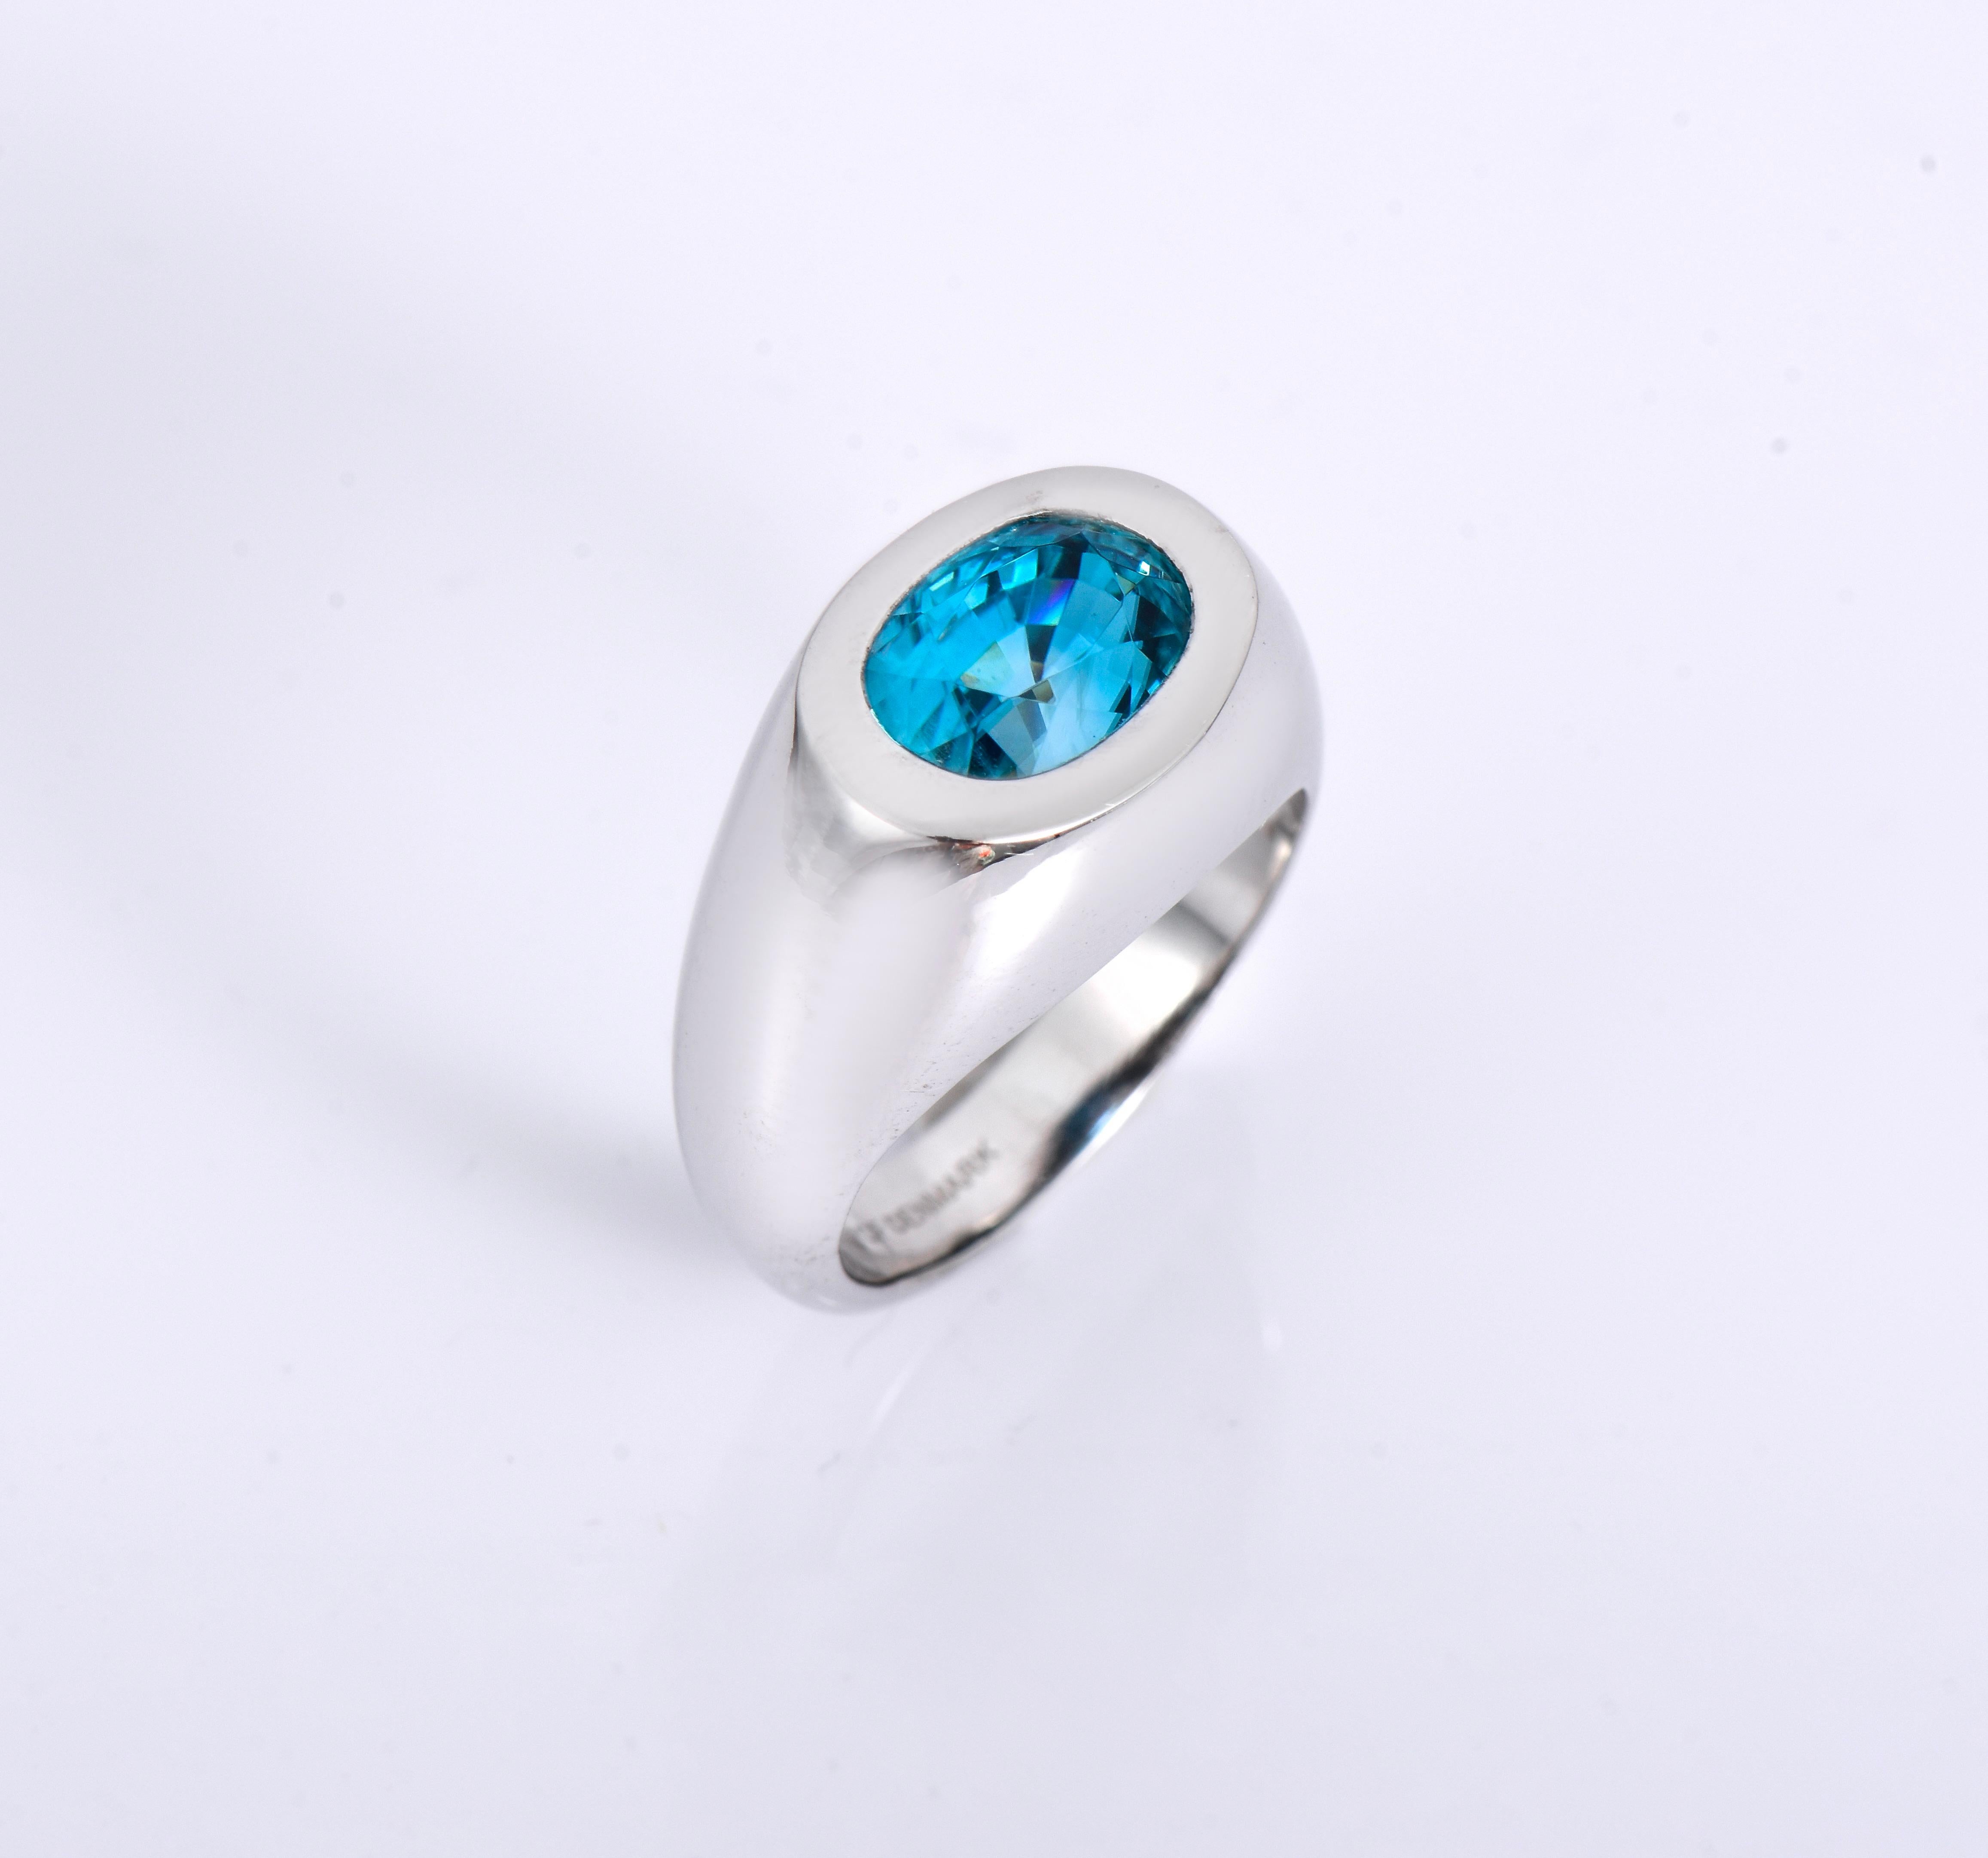 Contemporary Orloff of Denmark, 5.92 ct Natural Blue Zircon Ring in 925 Sterling Silver For Sale